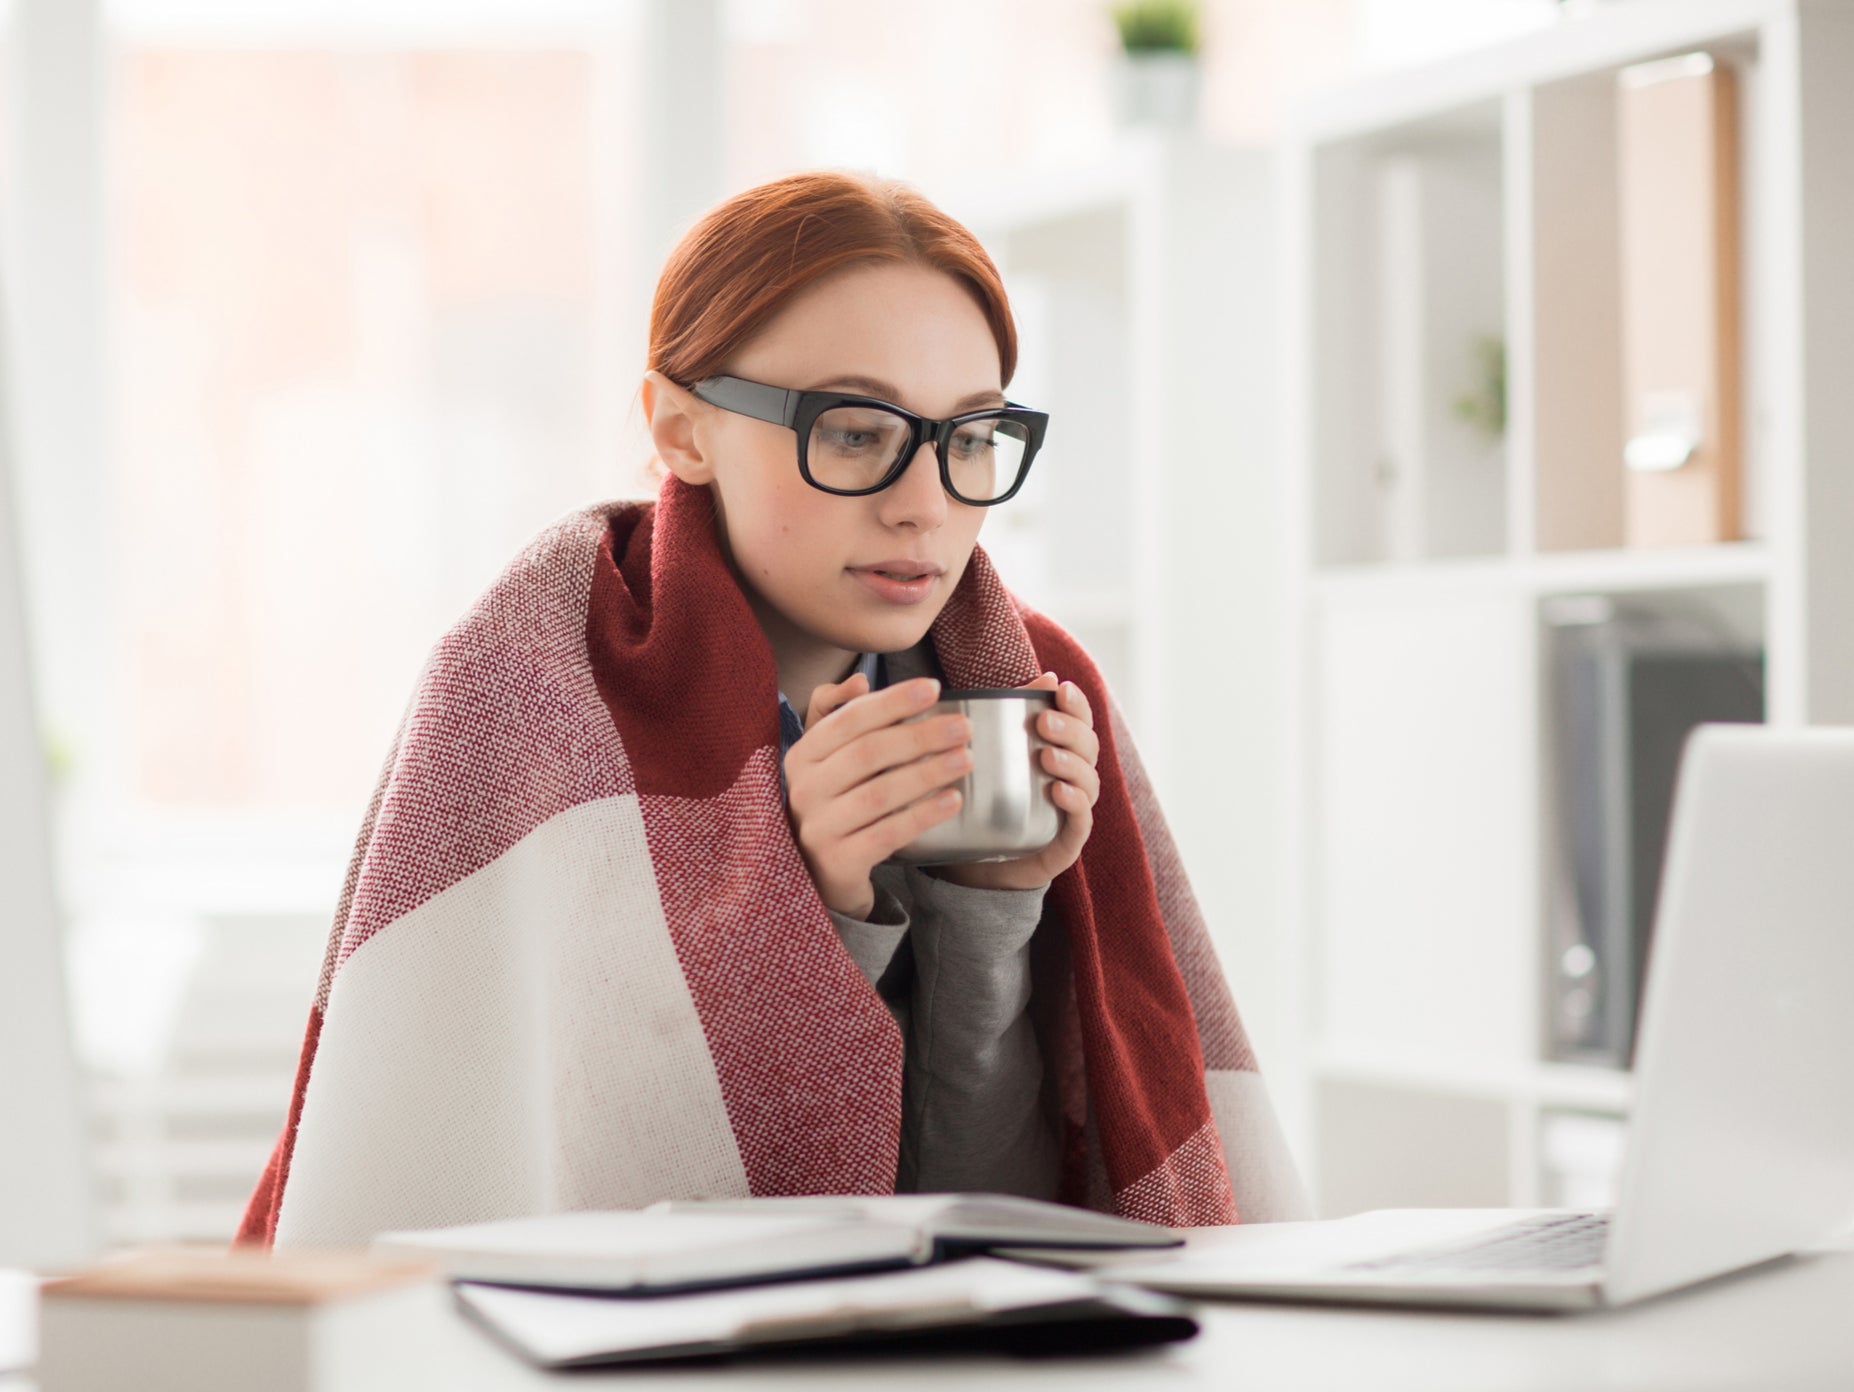 A person wears a blanket while at work